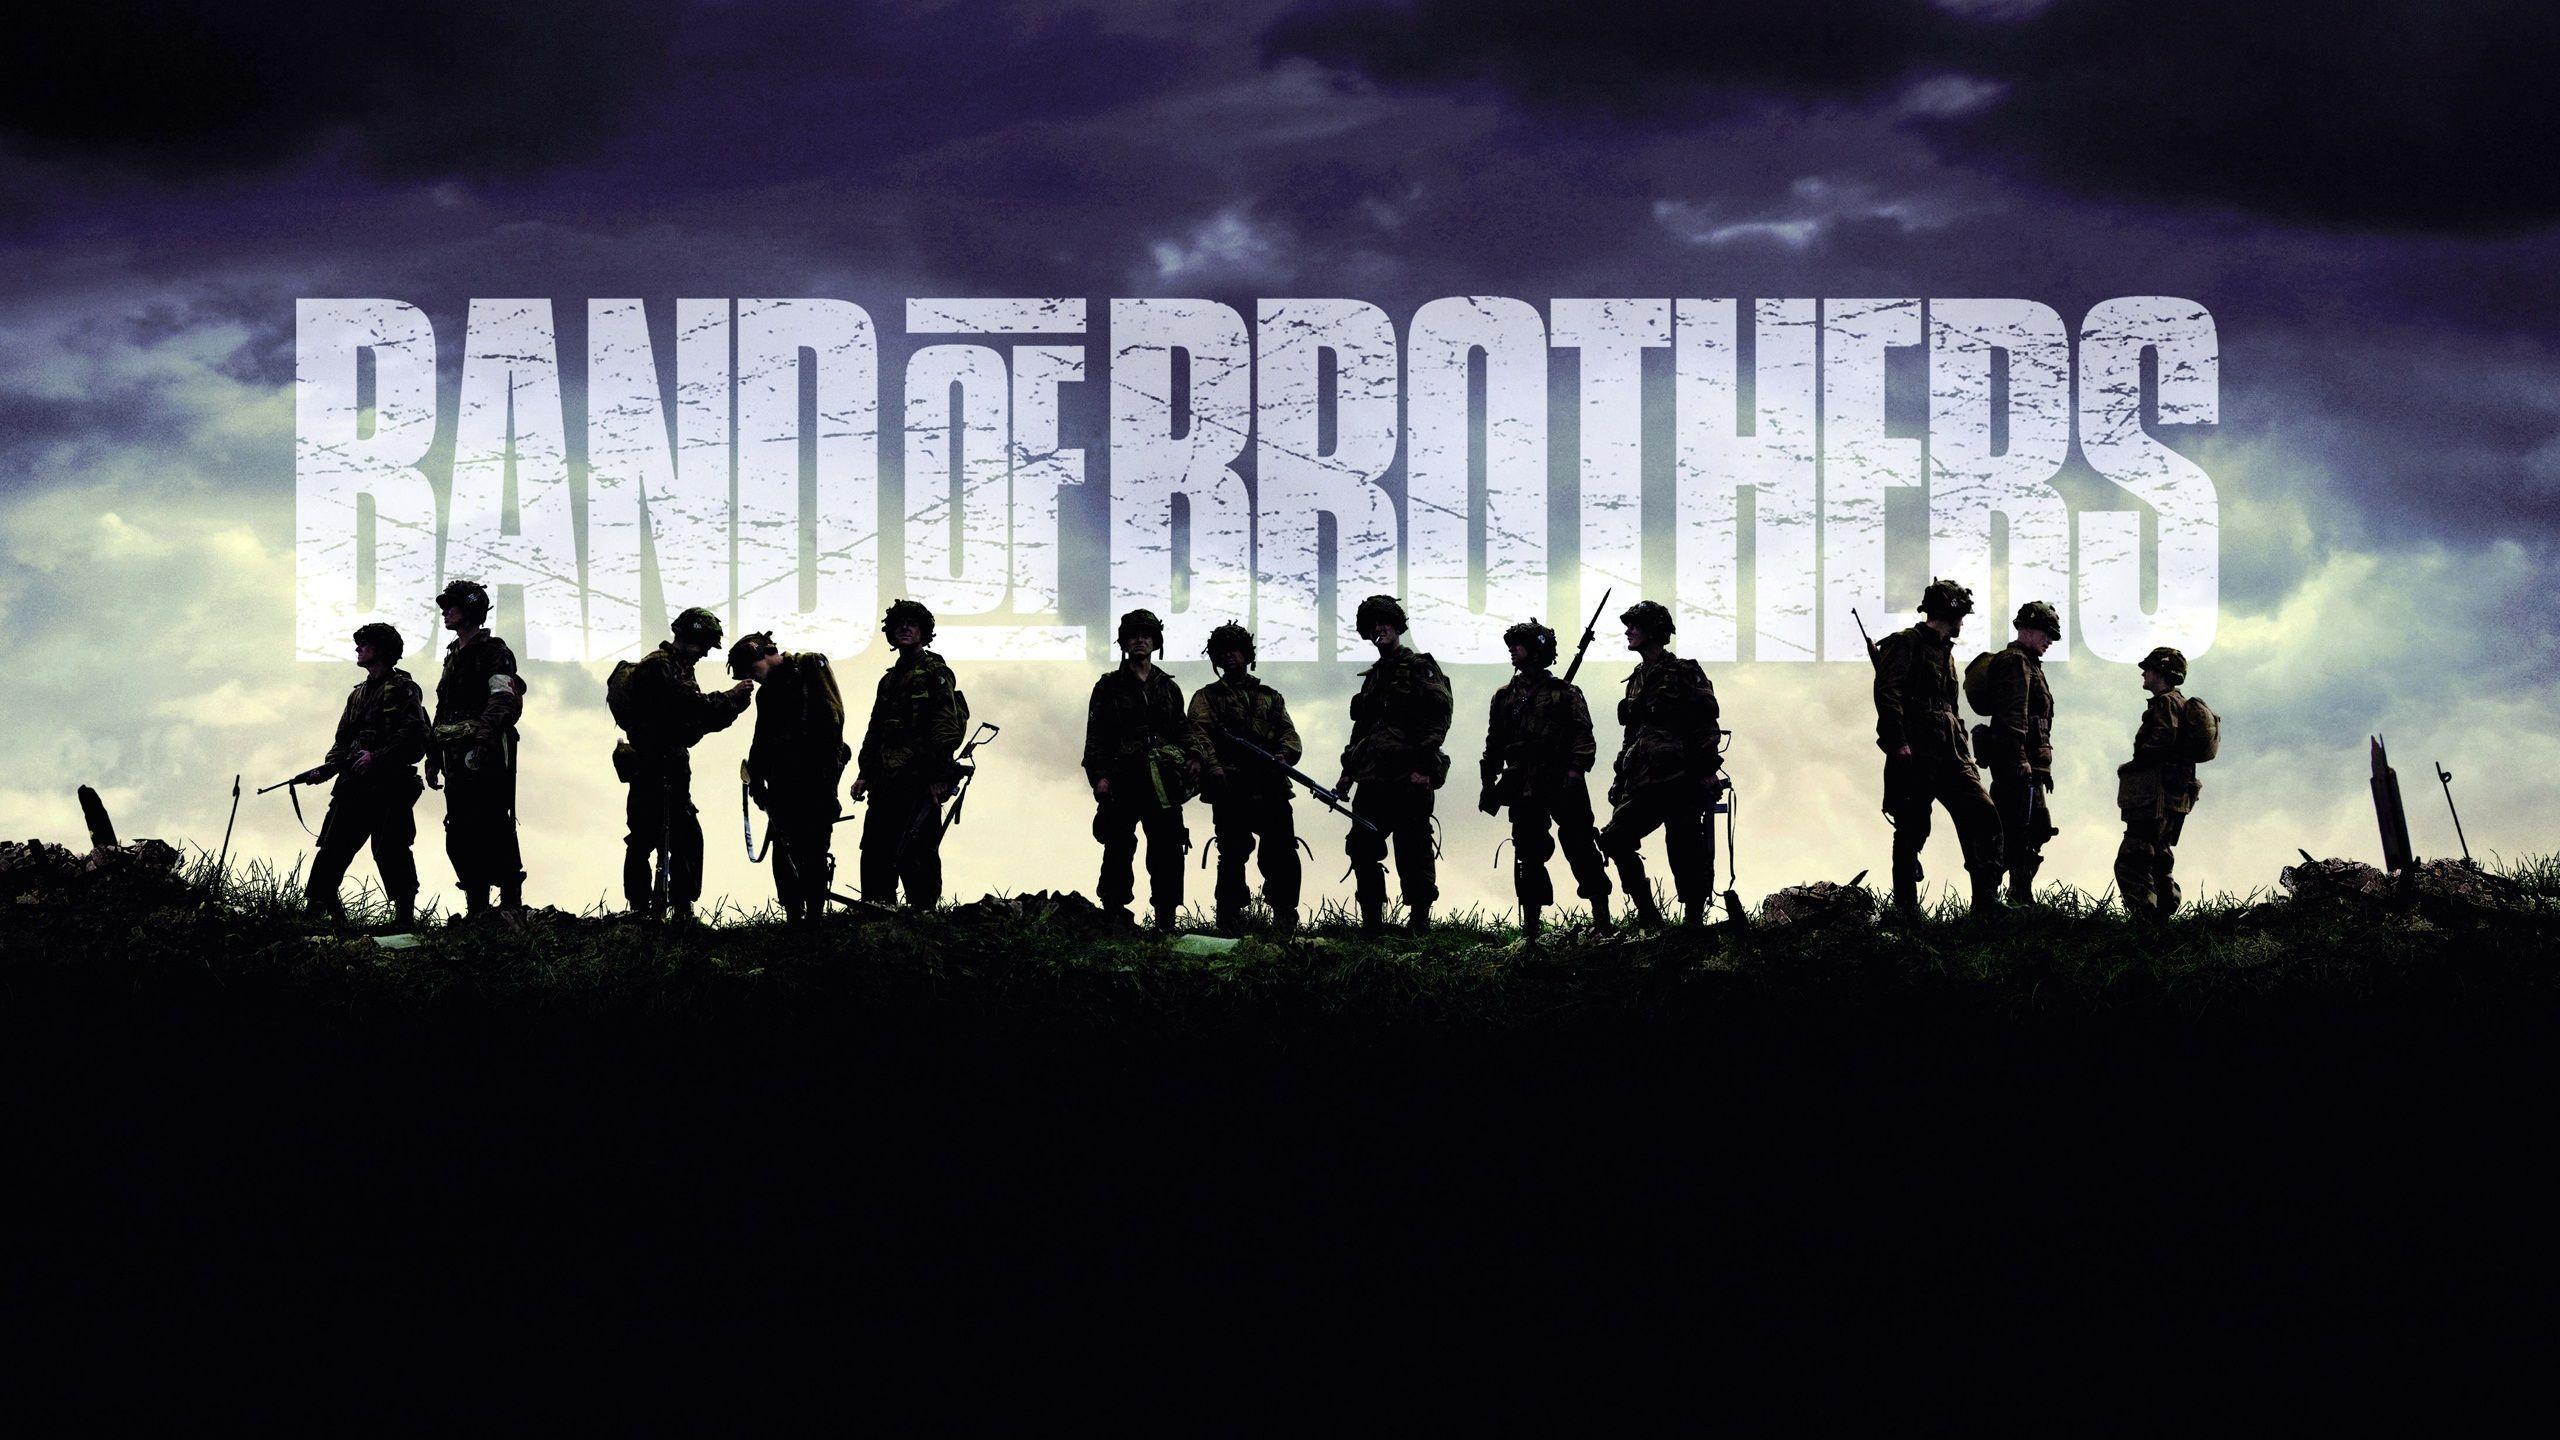 Band Of Brothers Wallpaper 20035 Download Free HD Desktop